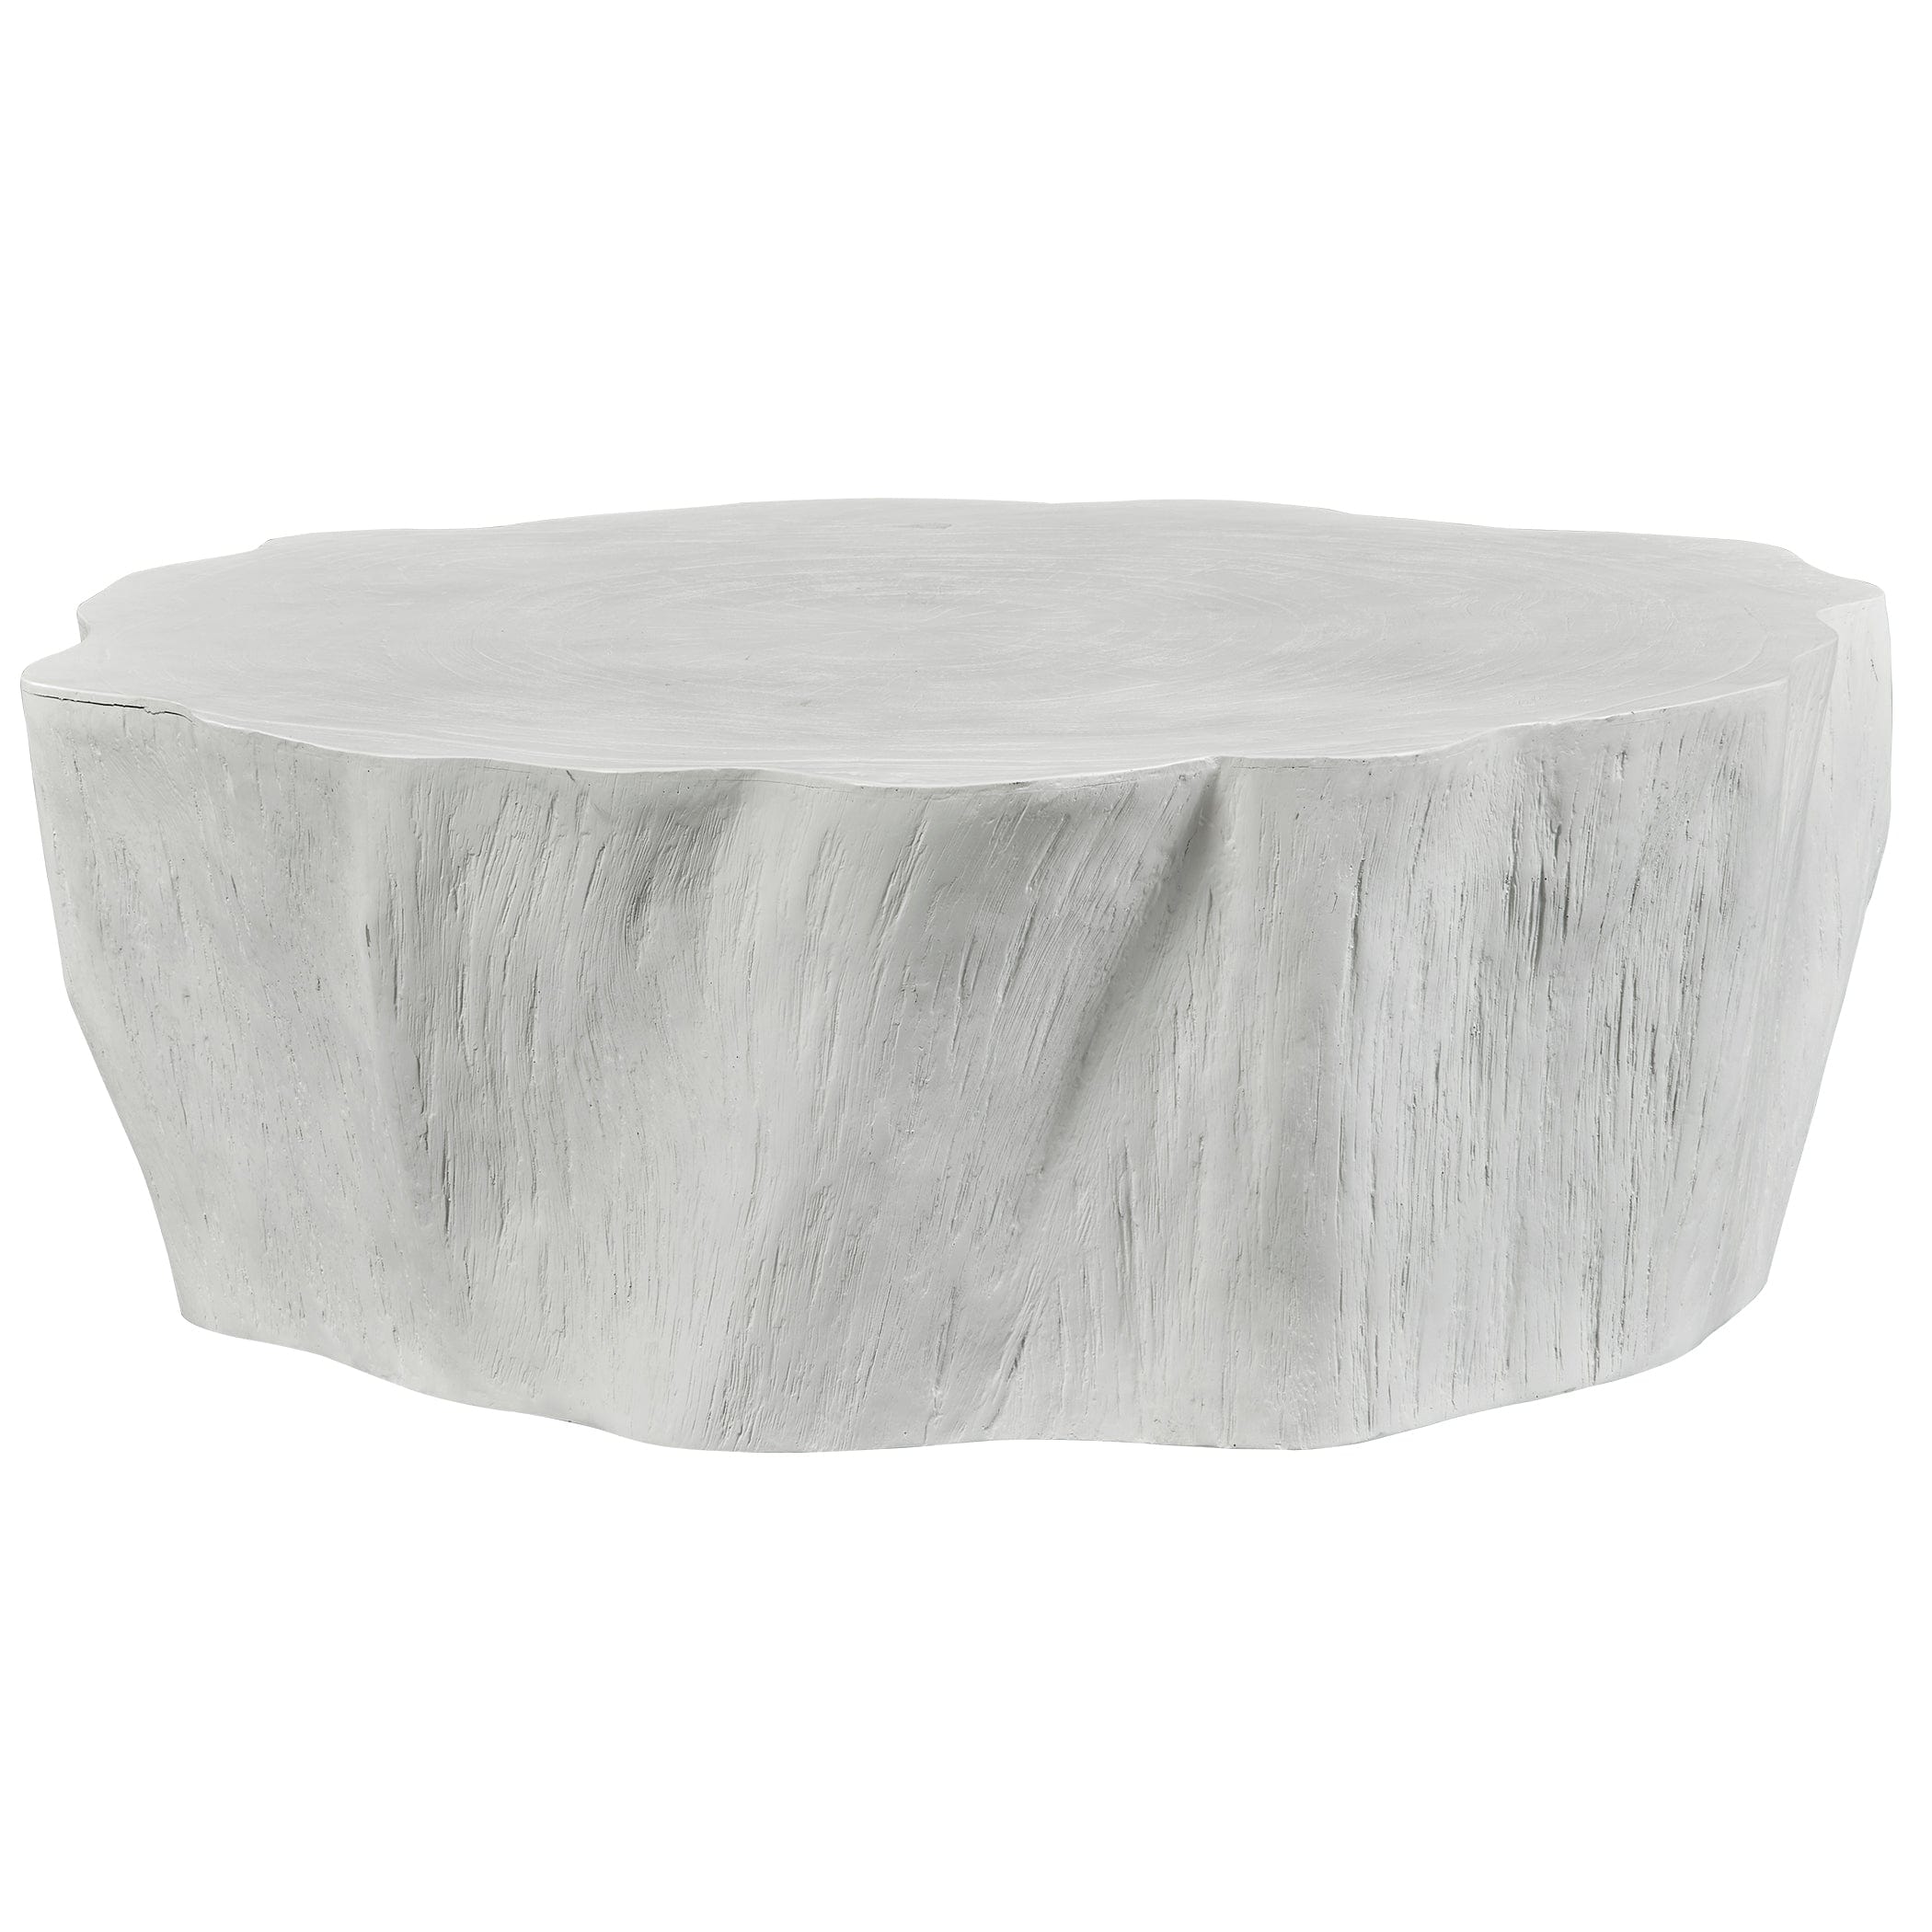 Woods Edge White Coffee Table Uttermost